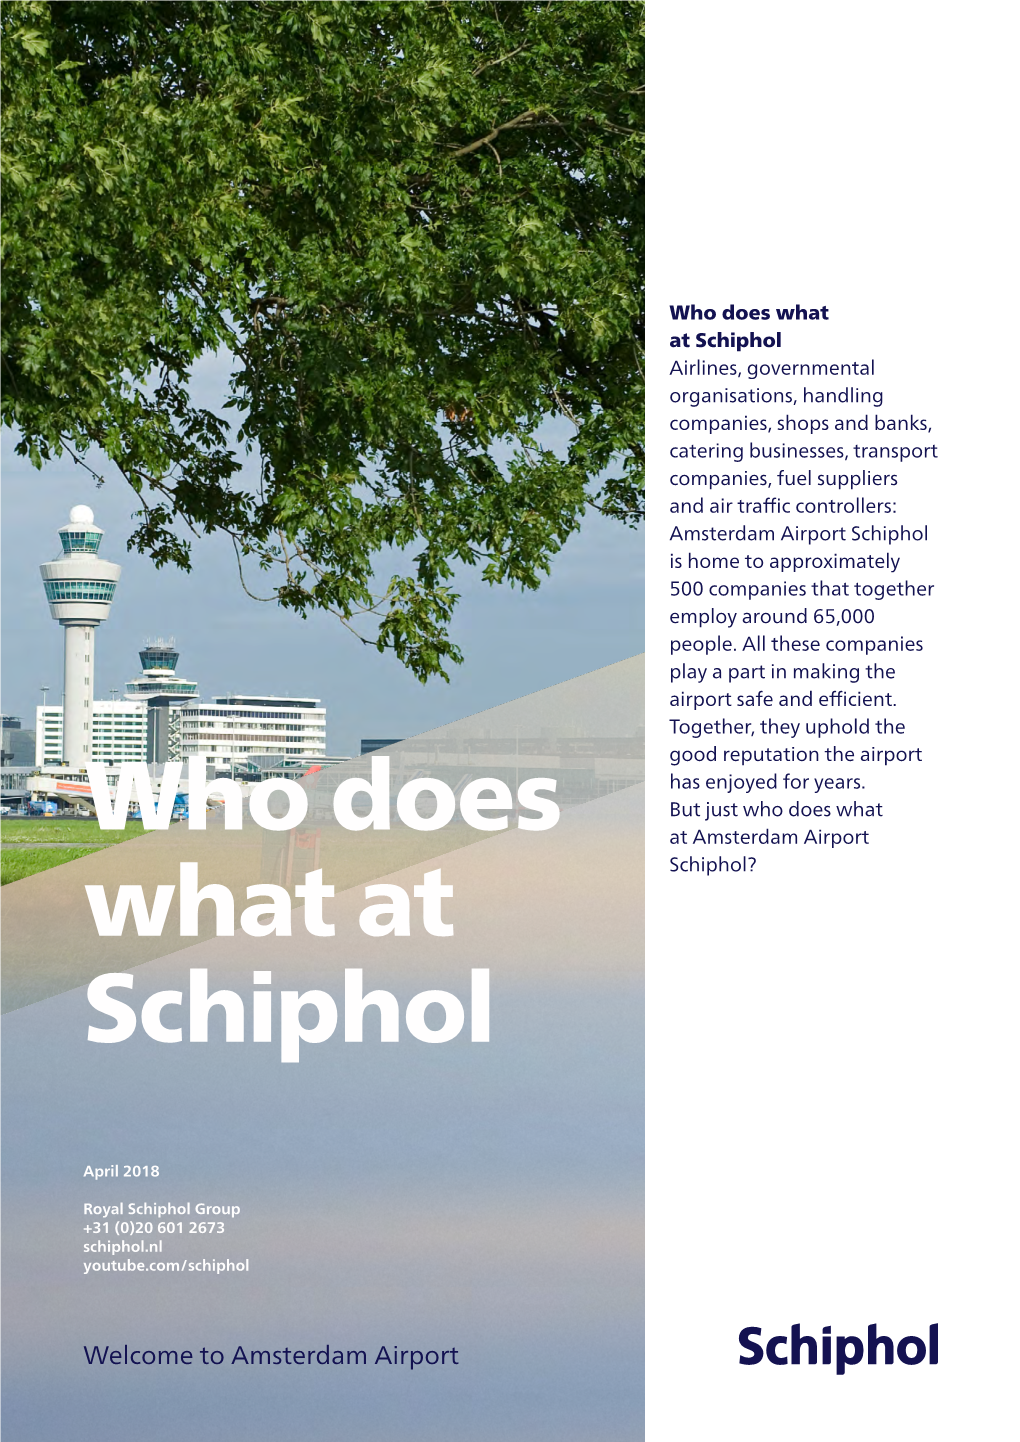 Who Does What at Schiphol